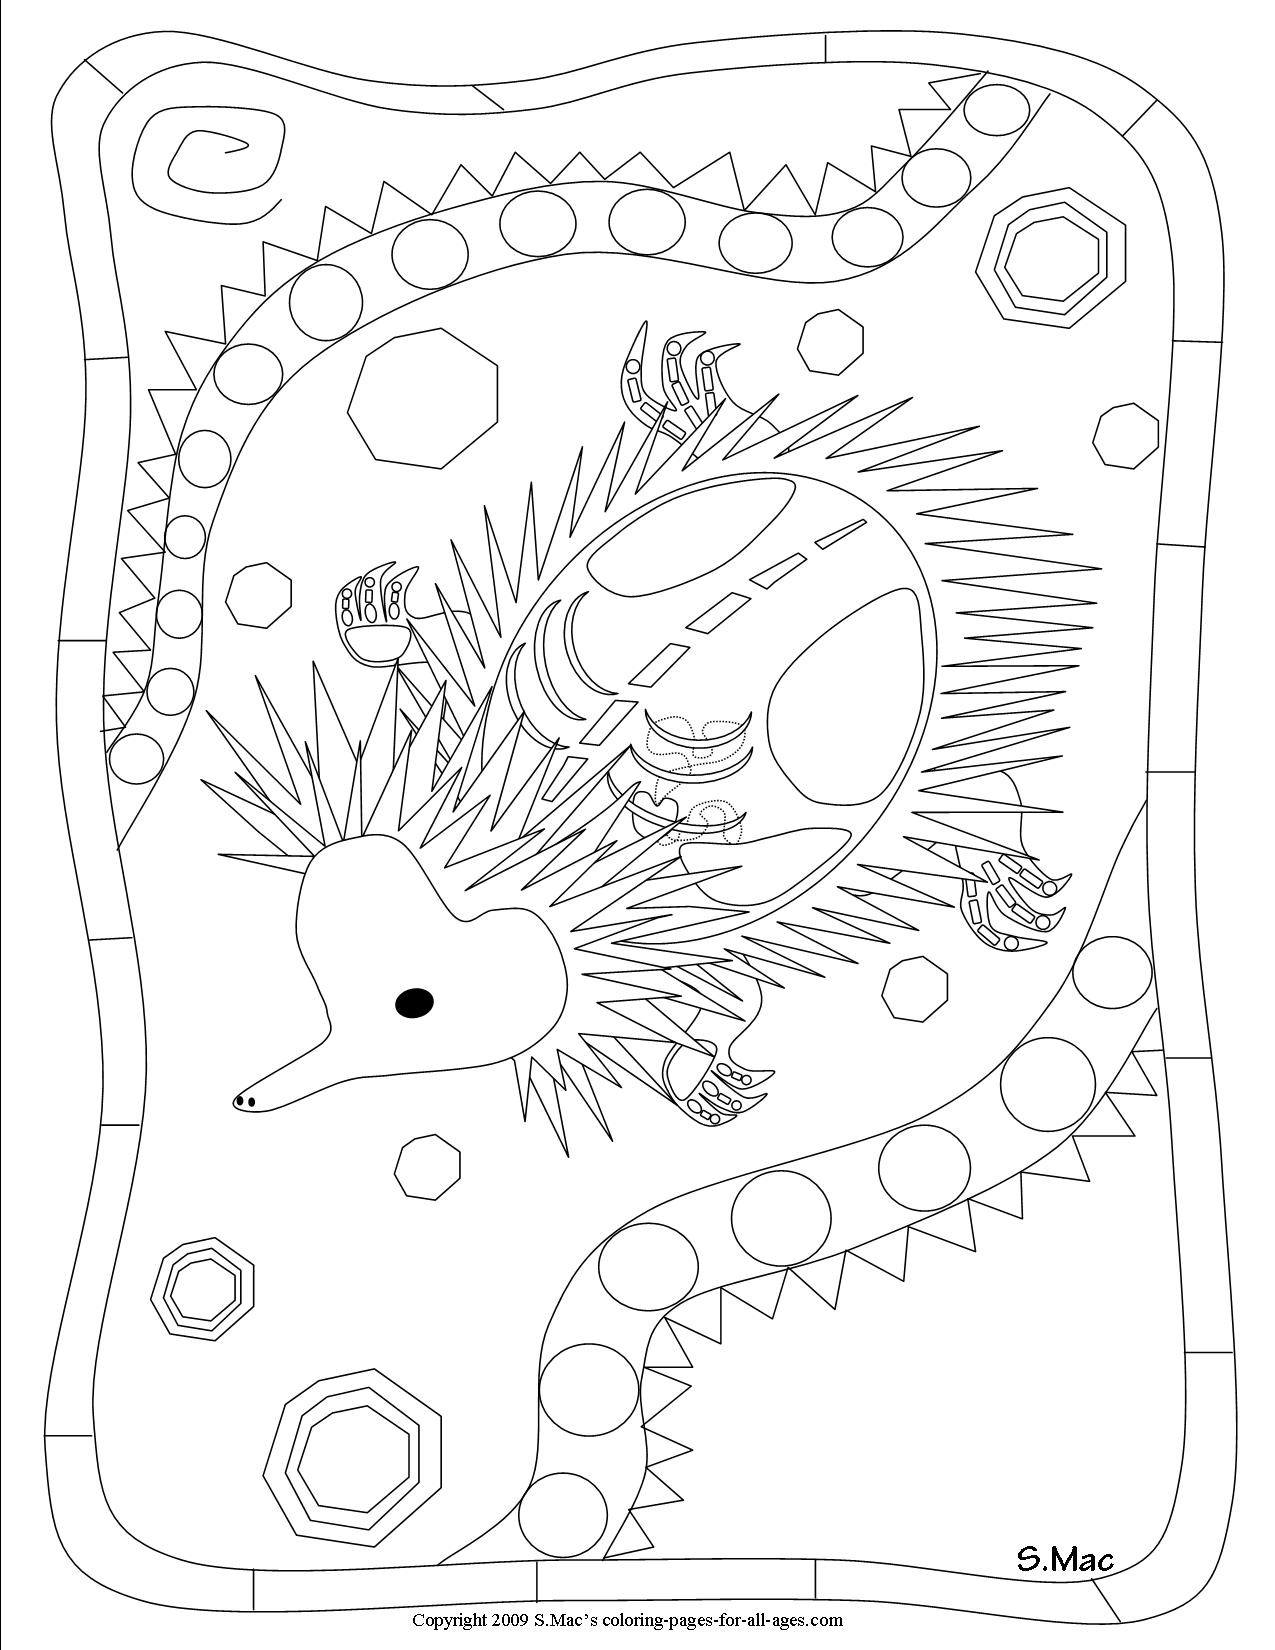 Xray Coloring Pages - Coloring Home